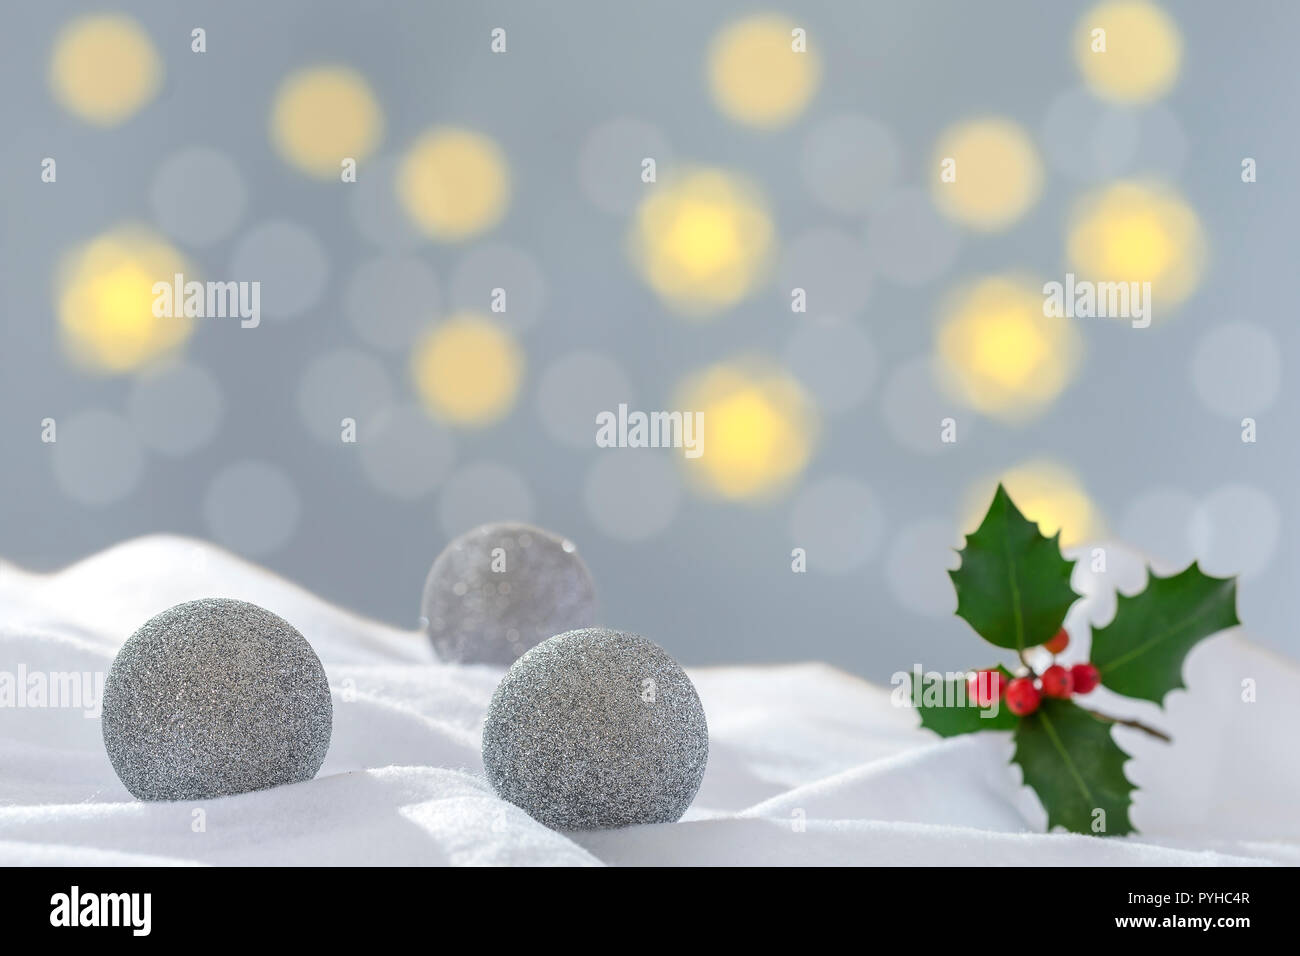 Christmas Decoration with silver, three Balls in the Snow on the Blurred Lights Background Greeting Card Stock Photo